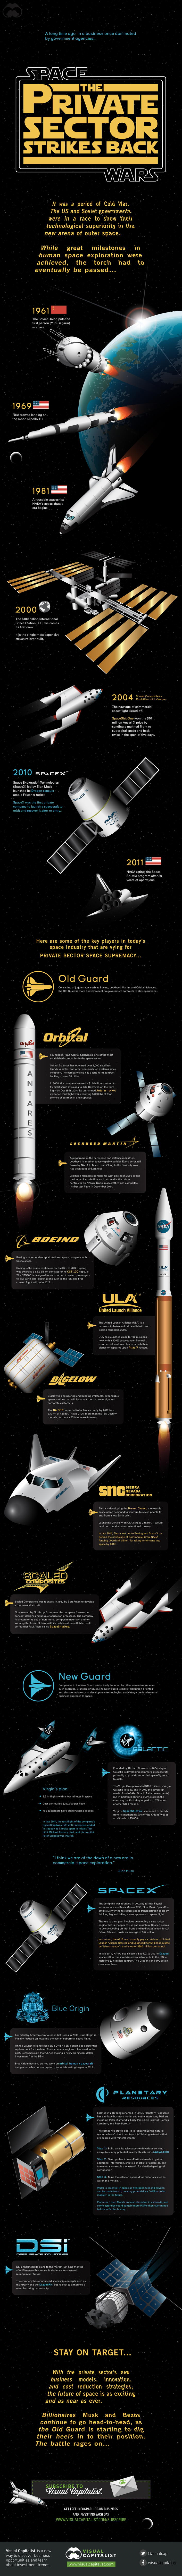 [Infographic] Space Wars: The Private Sector Strikes Back